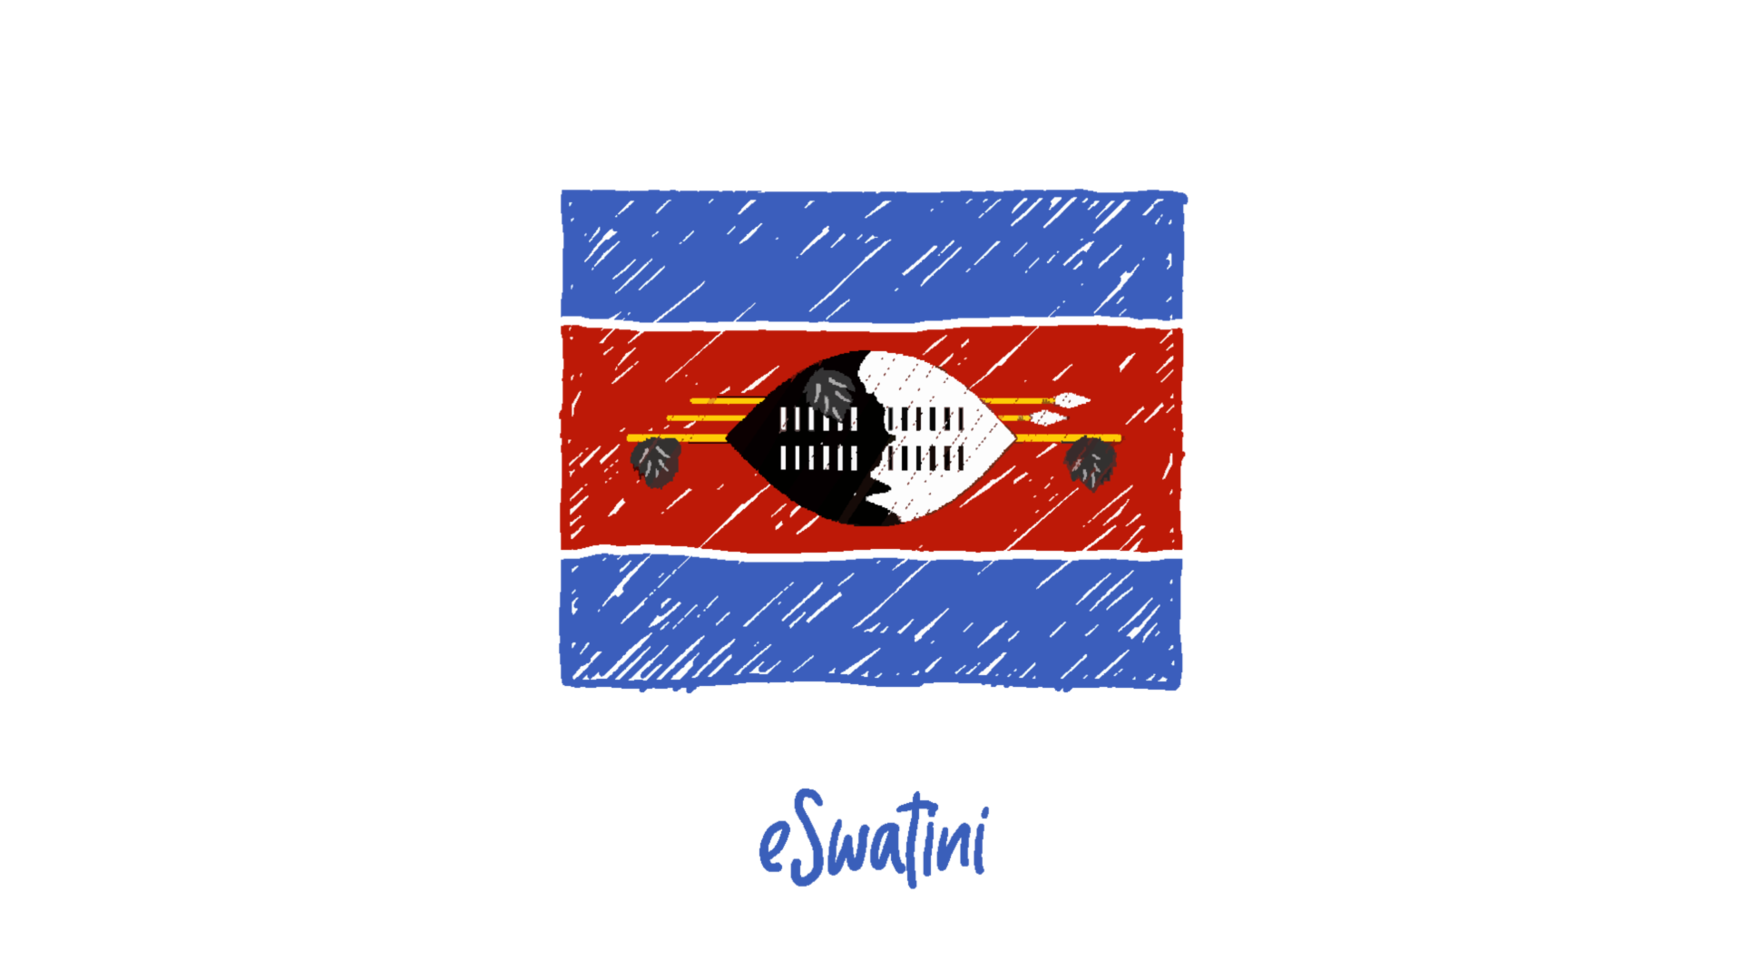 Eswatini National Flag Pencil Color Sketch with Transparent Background png